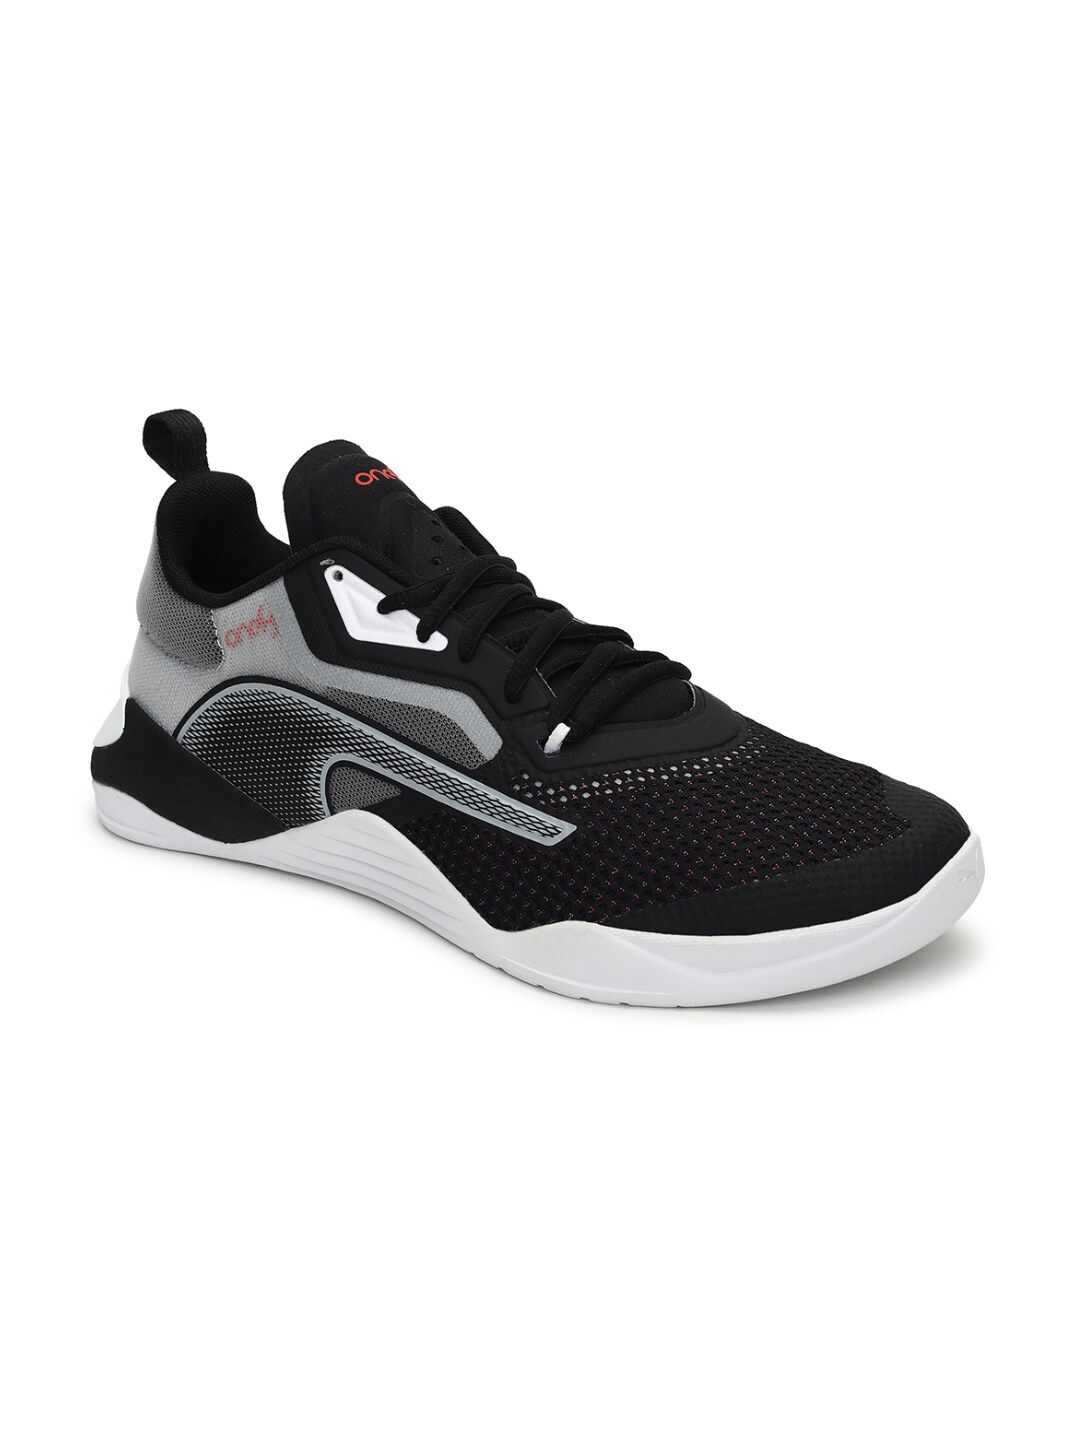 one8 x PUMA Unisex Black Textile Training or Gym Shoes Price in India